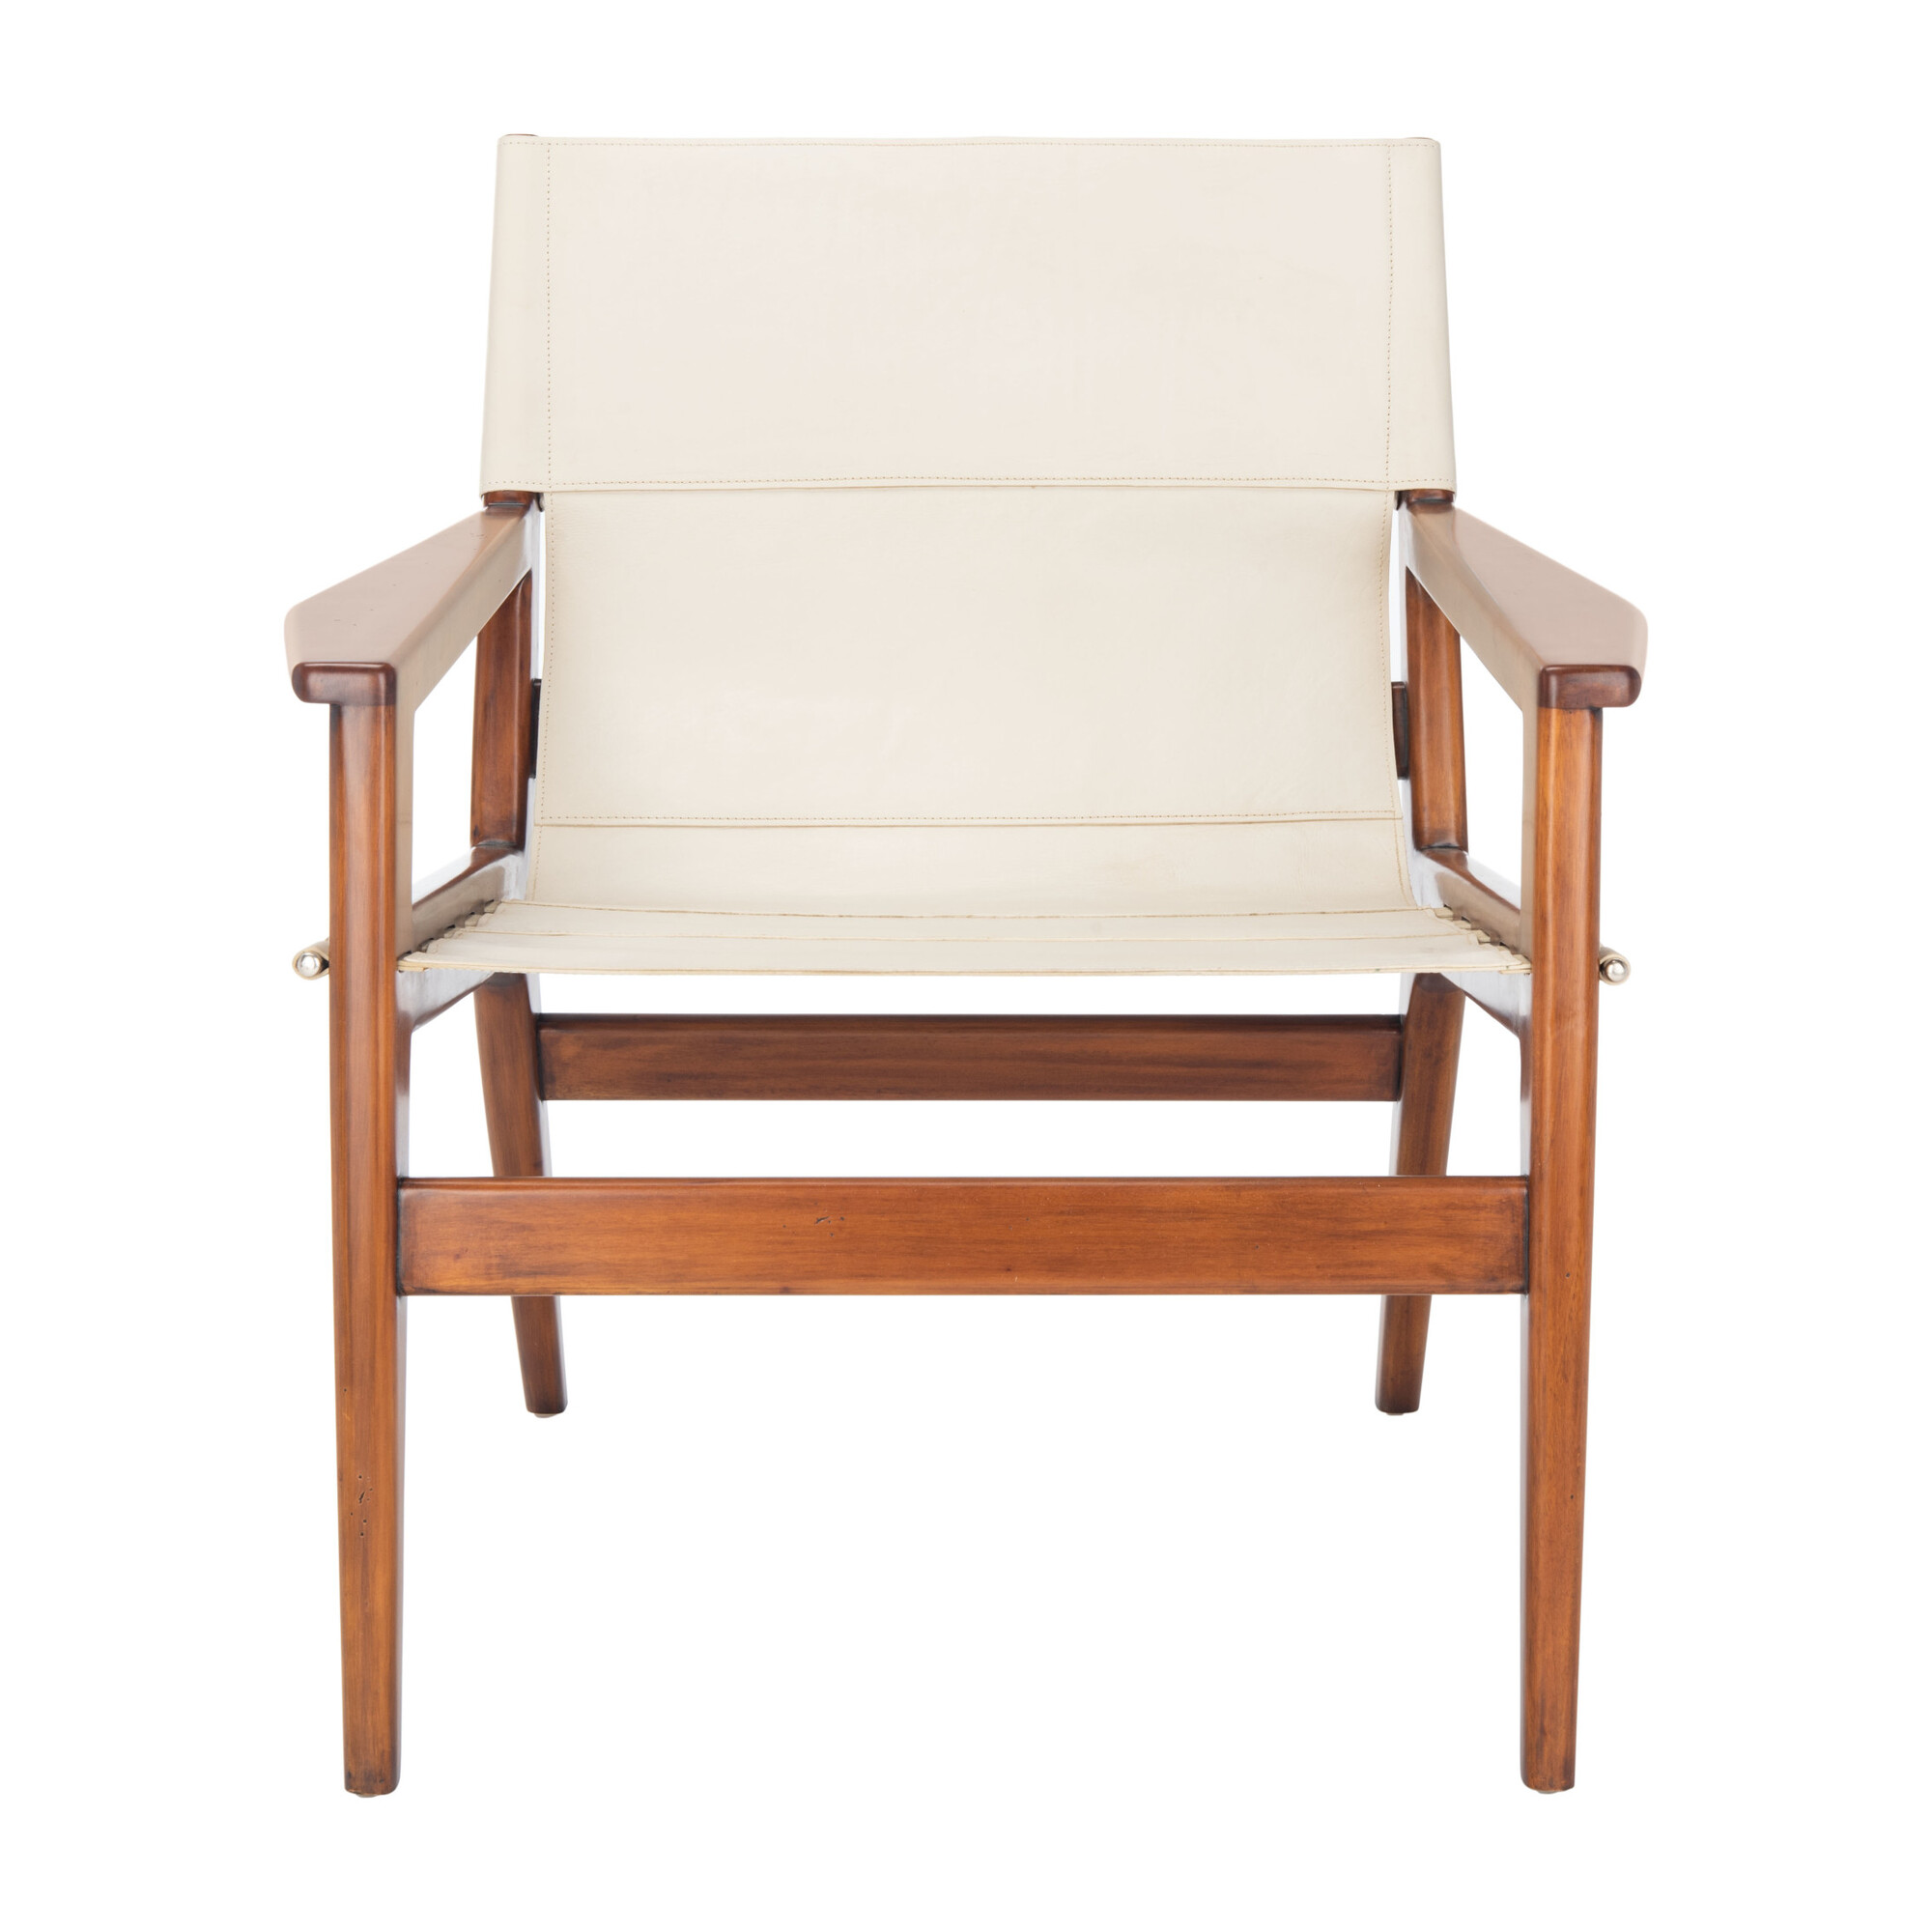 culkin leather sling chair white